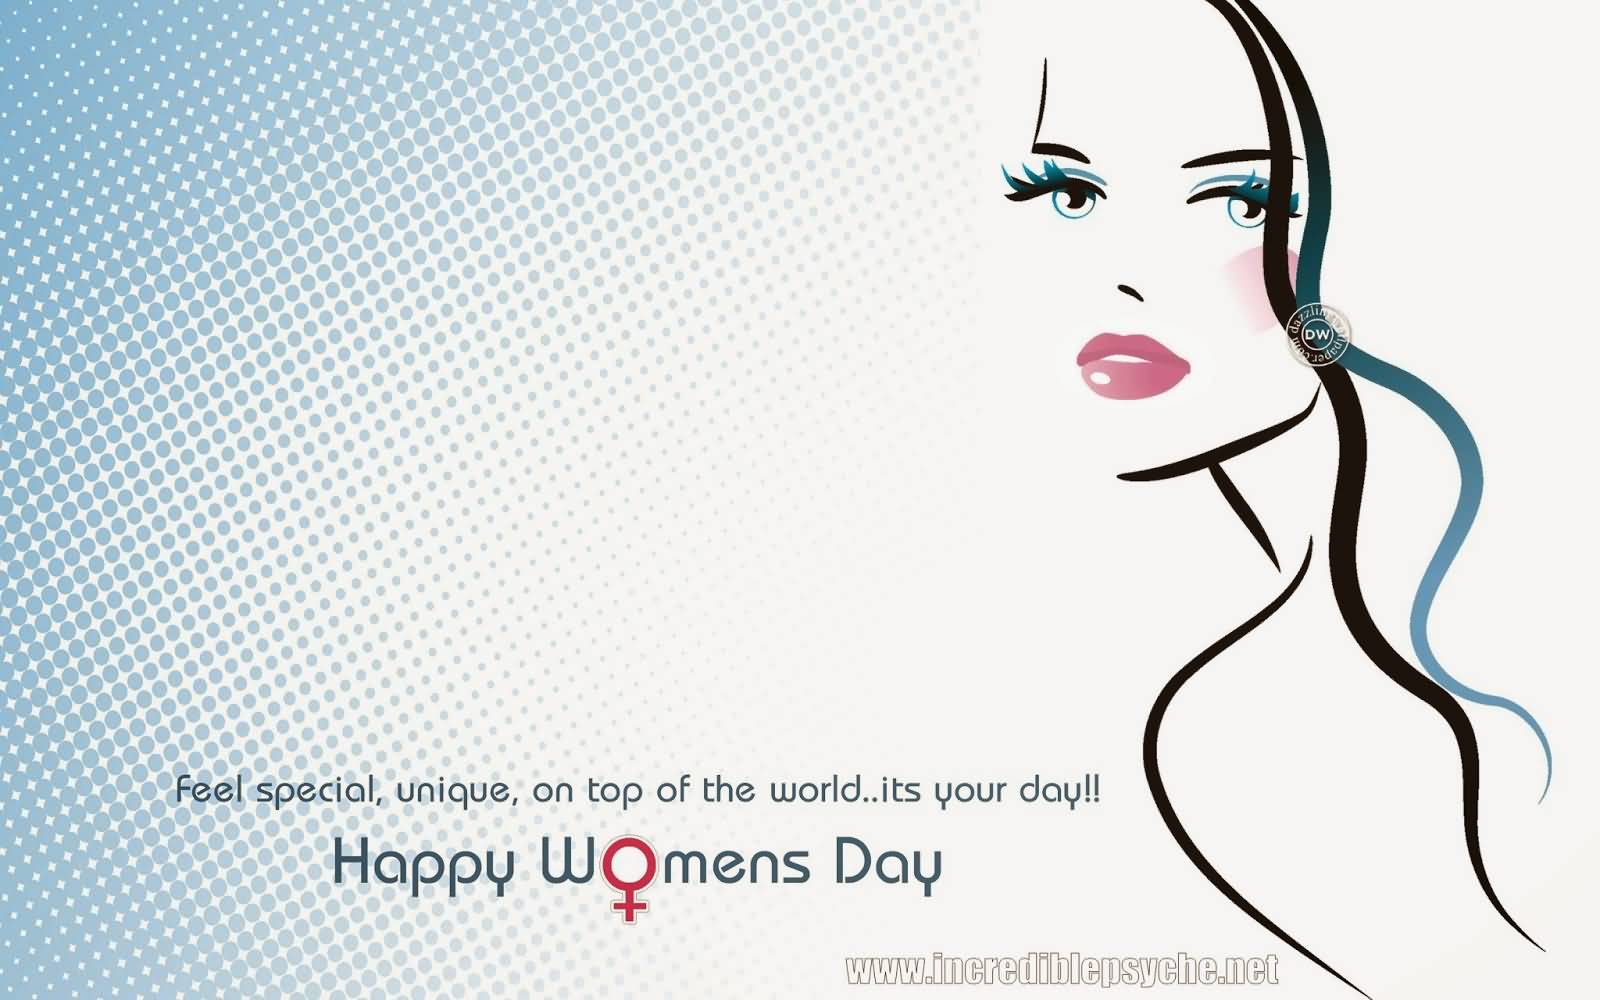 Feel Special, Unique, On Top Of The World, It’s Your Day Happy Women’s Day Greeting Card